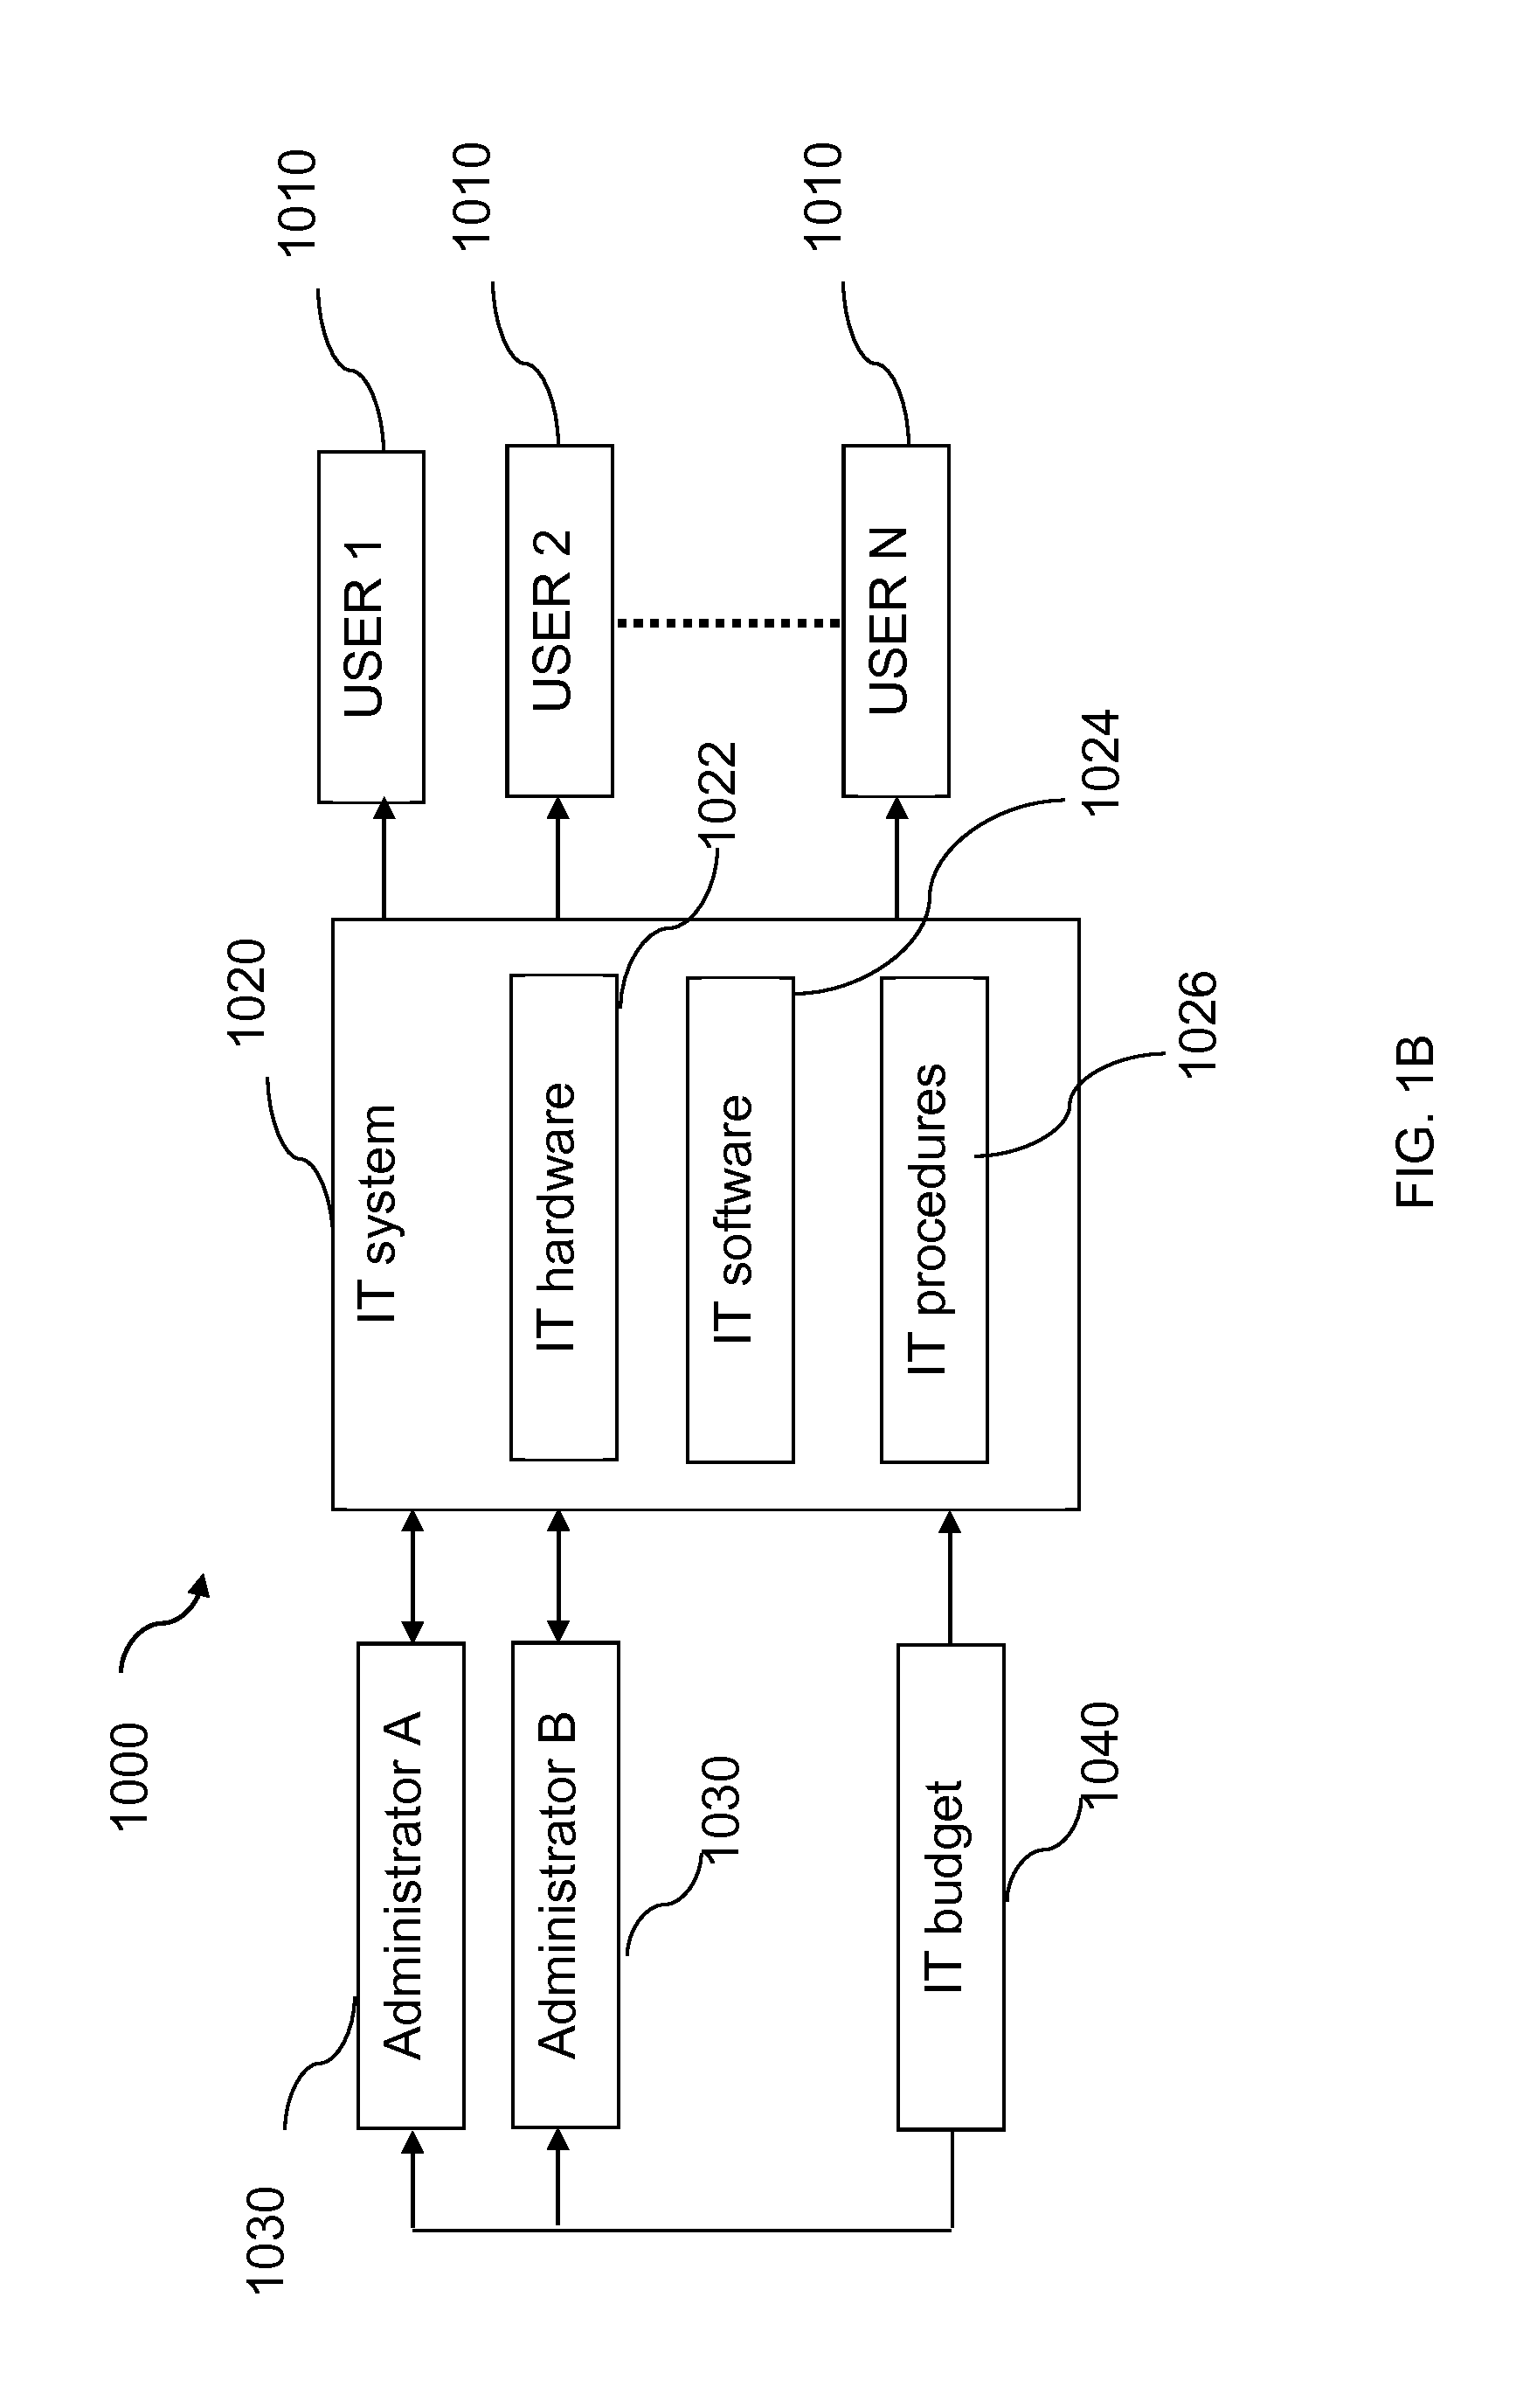 System and method of evaluating information technology (IT) systems